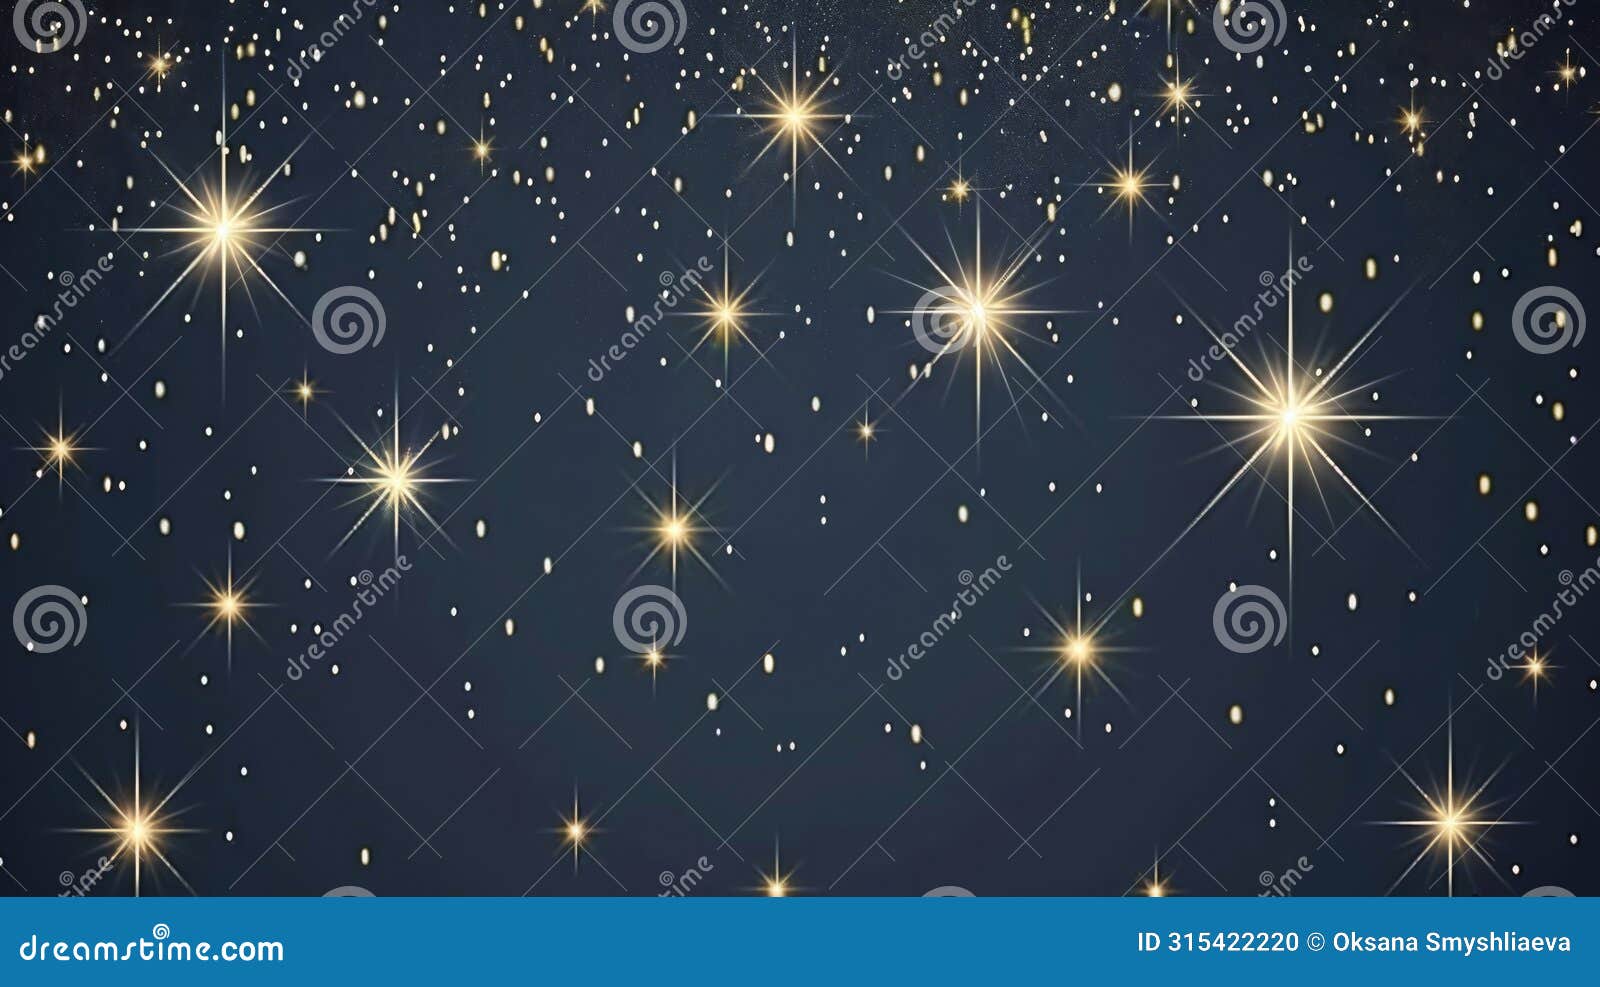 golden stars gleam with bright flares across a deep blue night sky, evoking the vastness of the universe